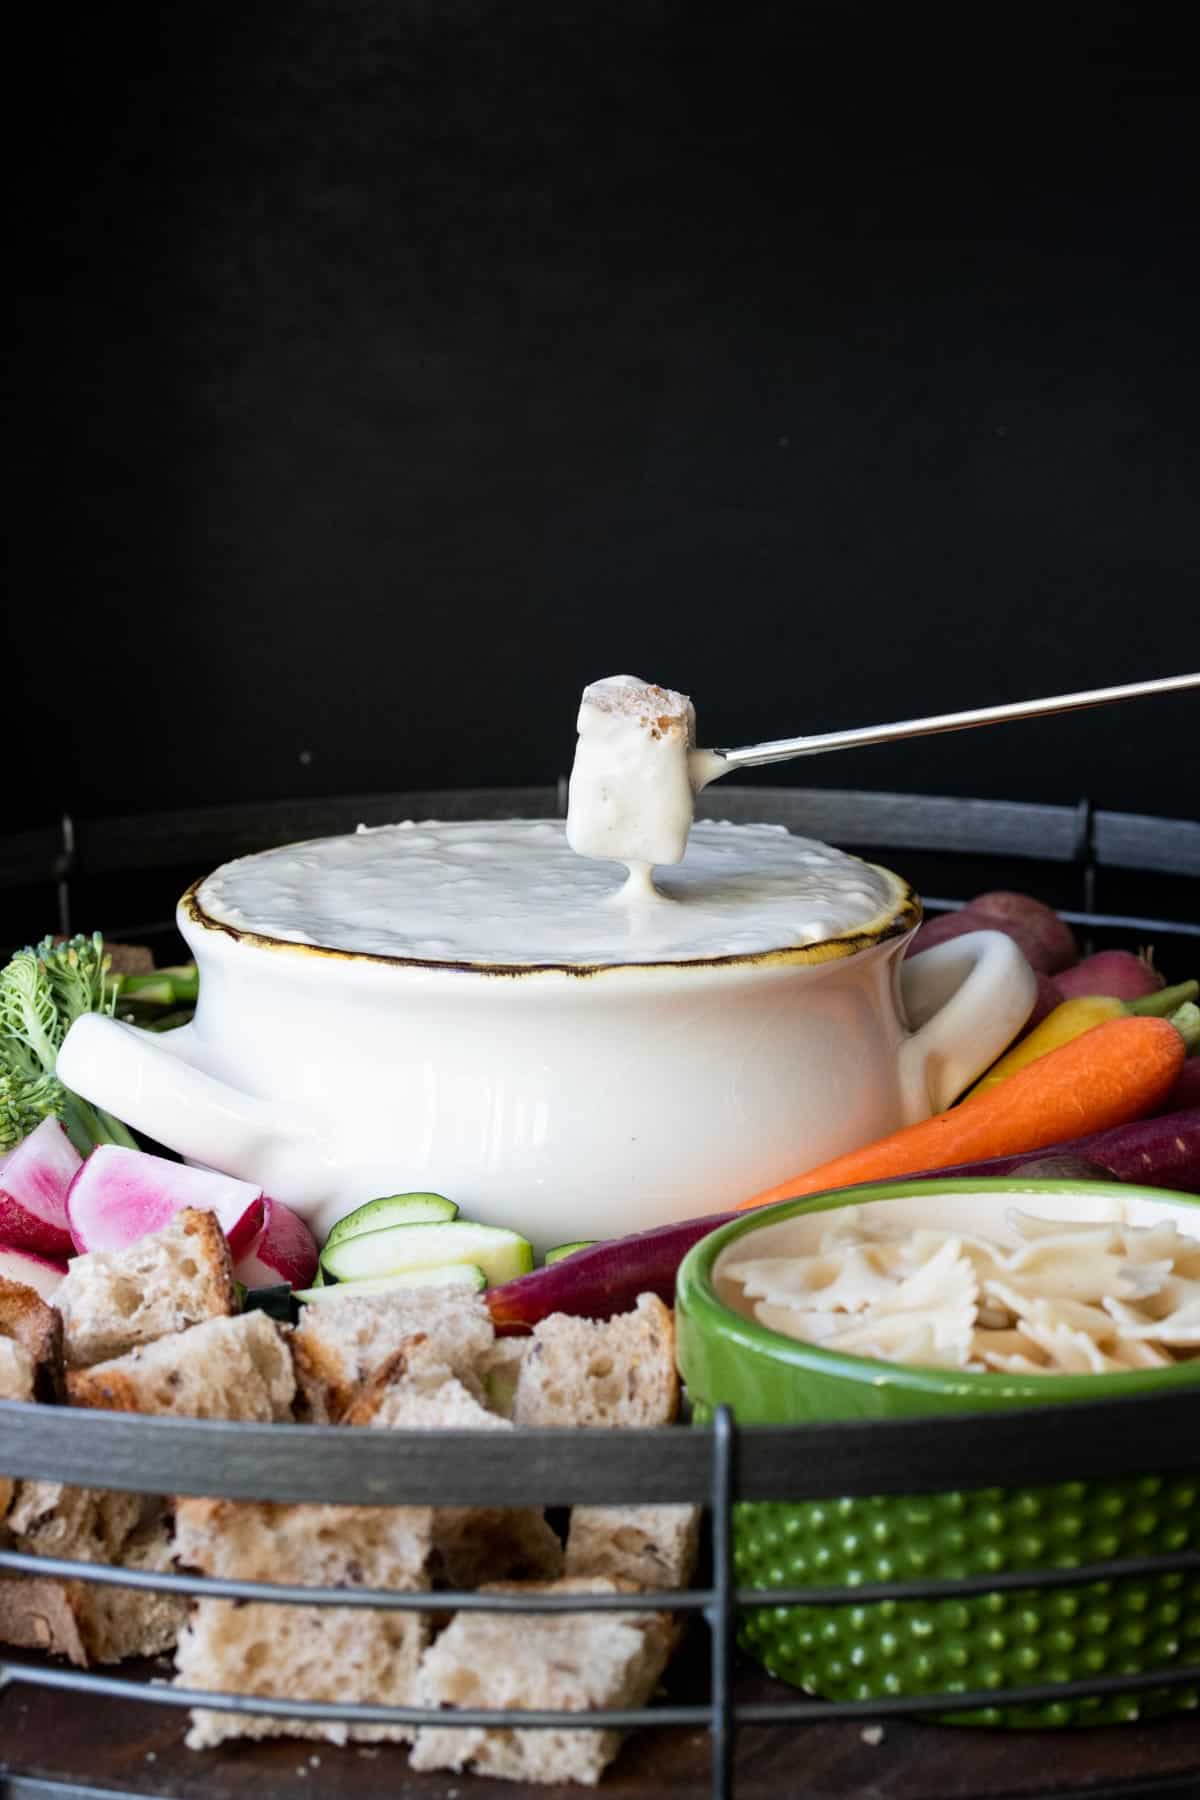 Piece of bread being dipped into a bowl of cheese fondue surrounded by veggies.